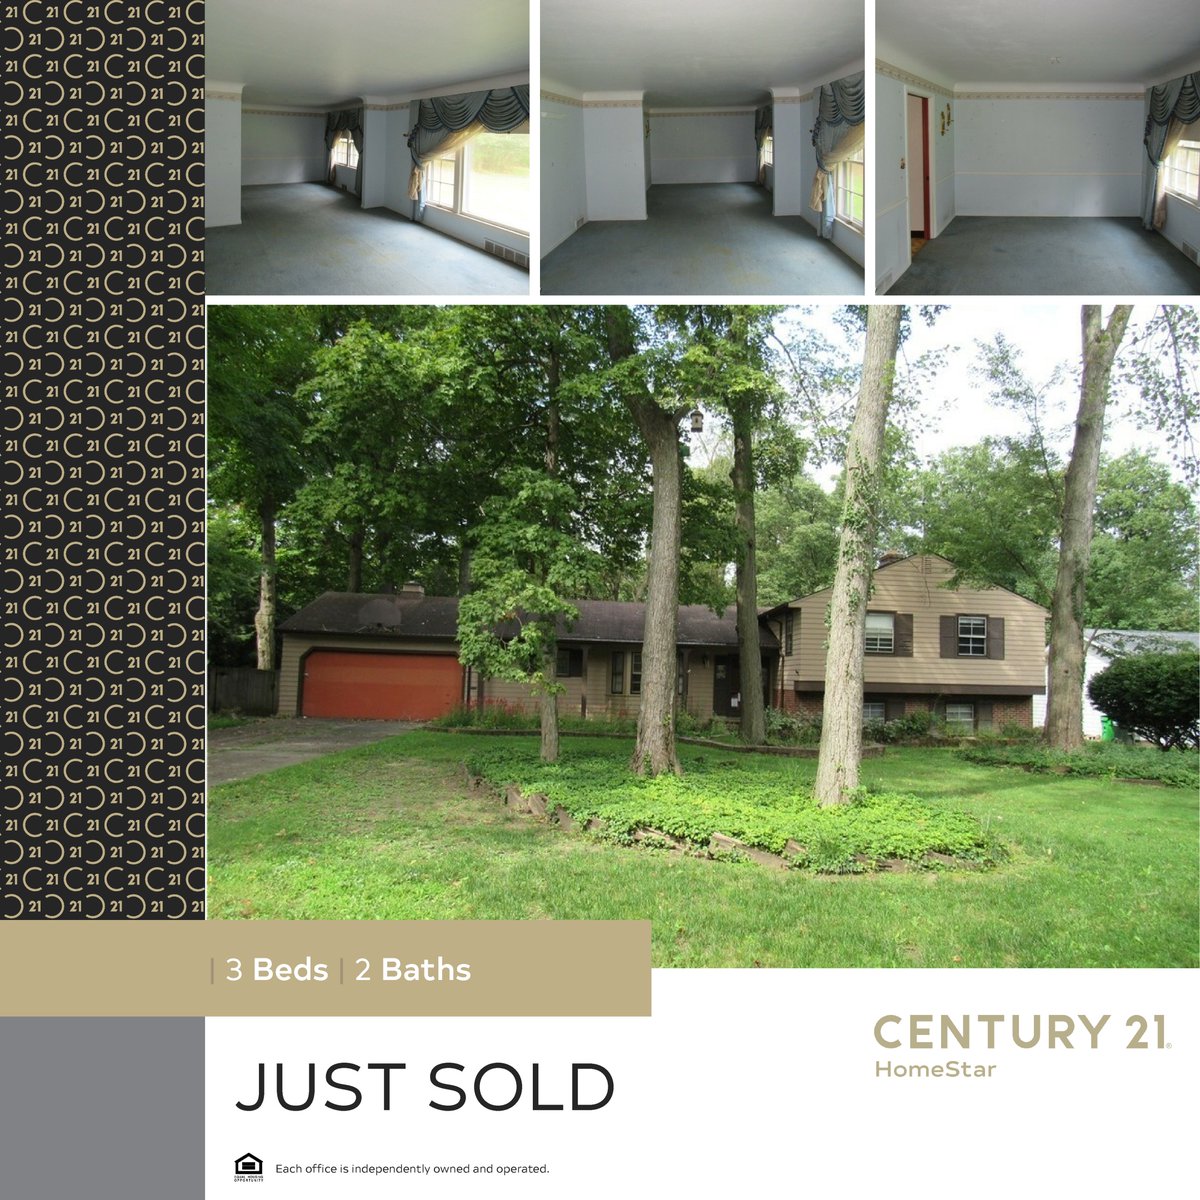 This listing, SOLD!  This one had it challenges to the updates needed to title issues.  We worked through them and it sold.  I can work through any issues to help you too!

#listingagent #sellersagent #realestateagent #realtor #sold #HiglandHeights #LetUsBringYouHome